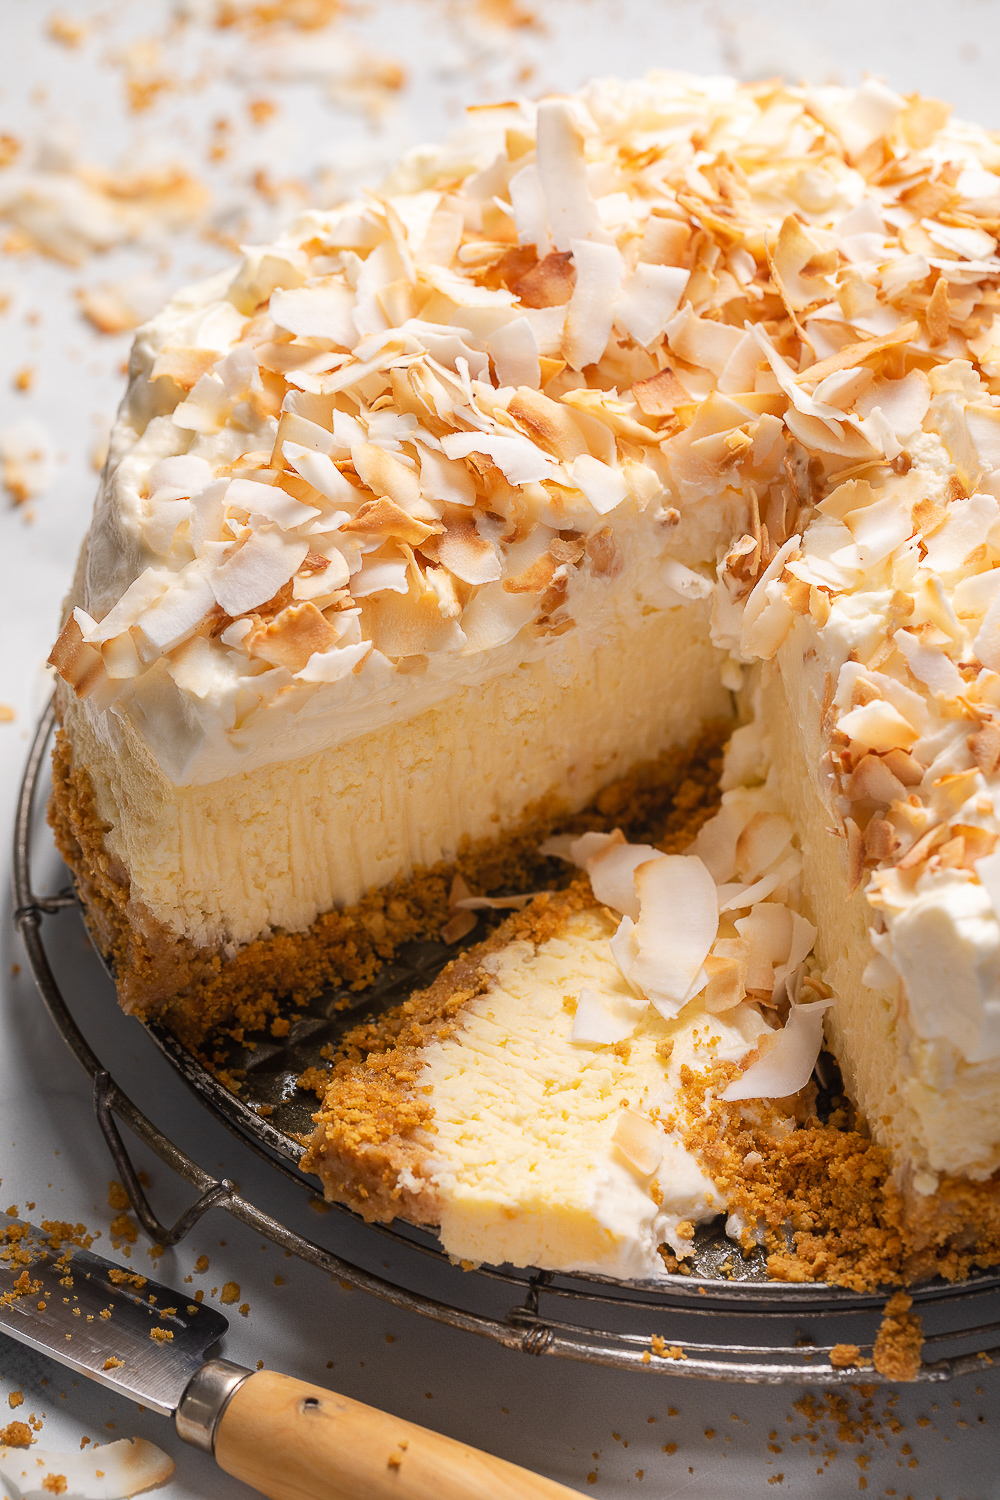 13 Freezer-Friendly Cheesecake Recipes for Holiday Dessert